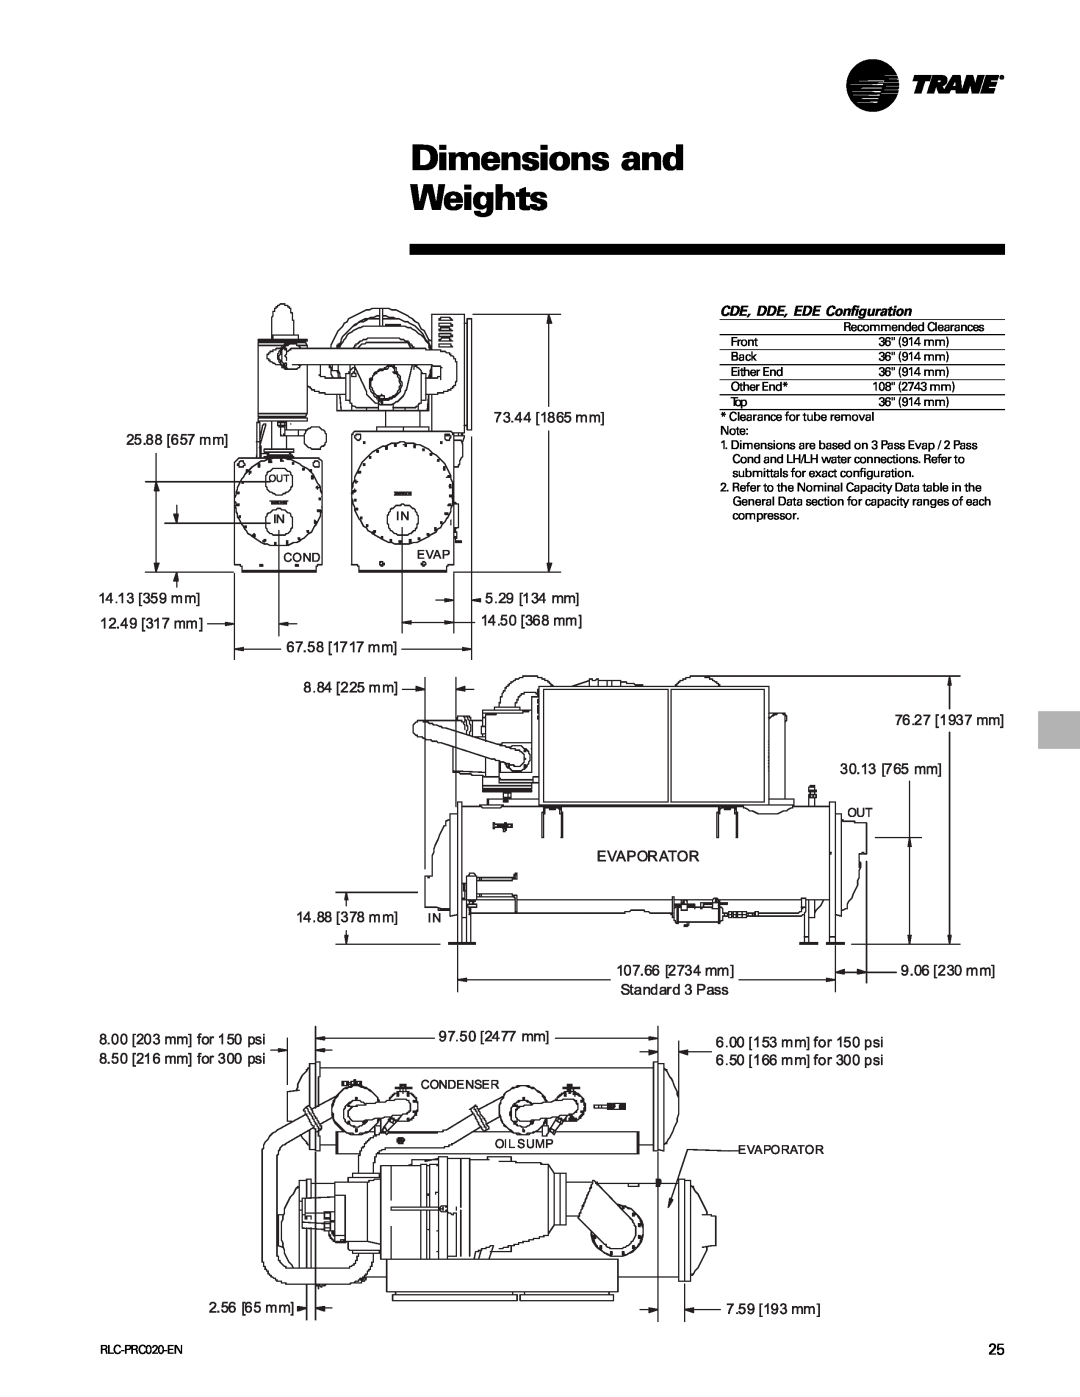 Trane RTHD manual Dimensions and Weights, CDE, DDE, EDE Configuration 